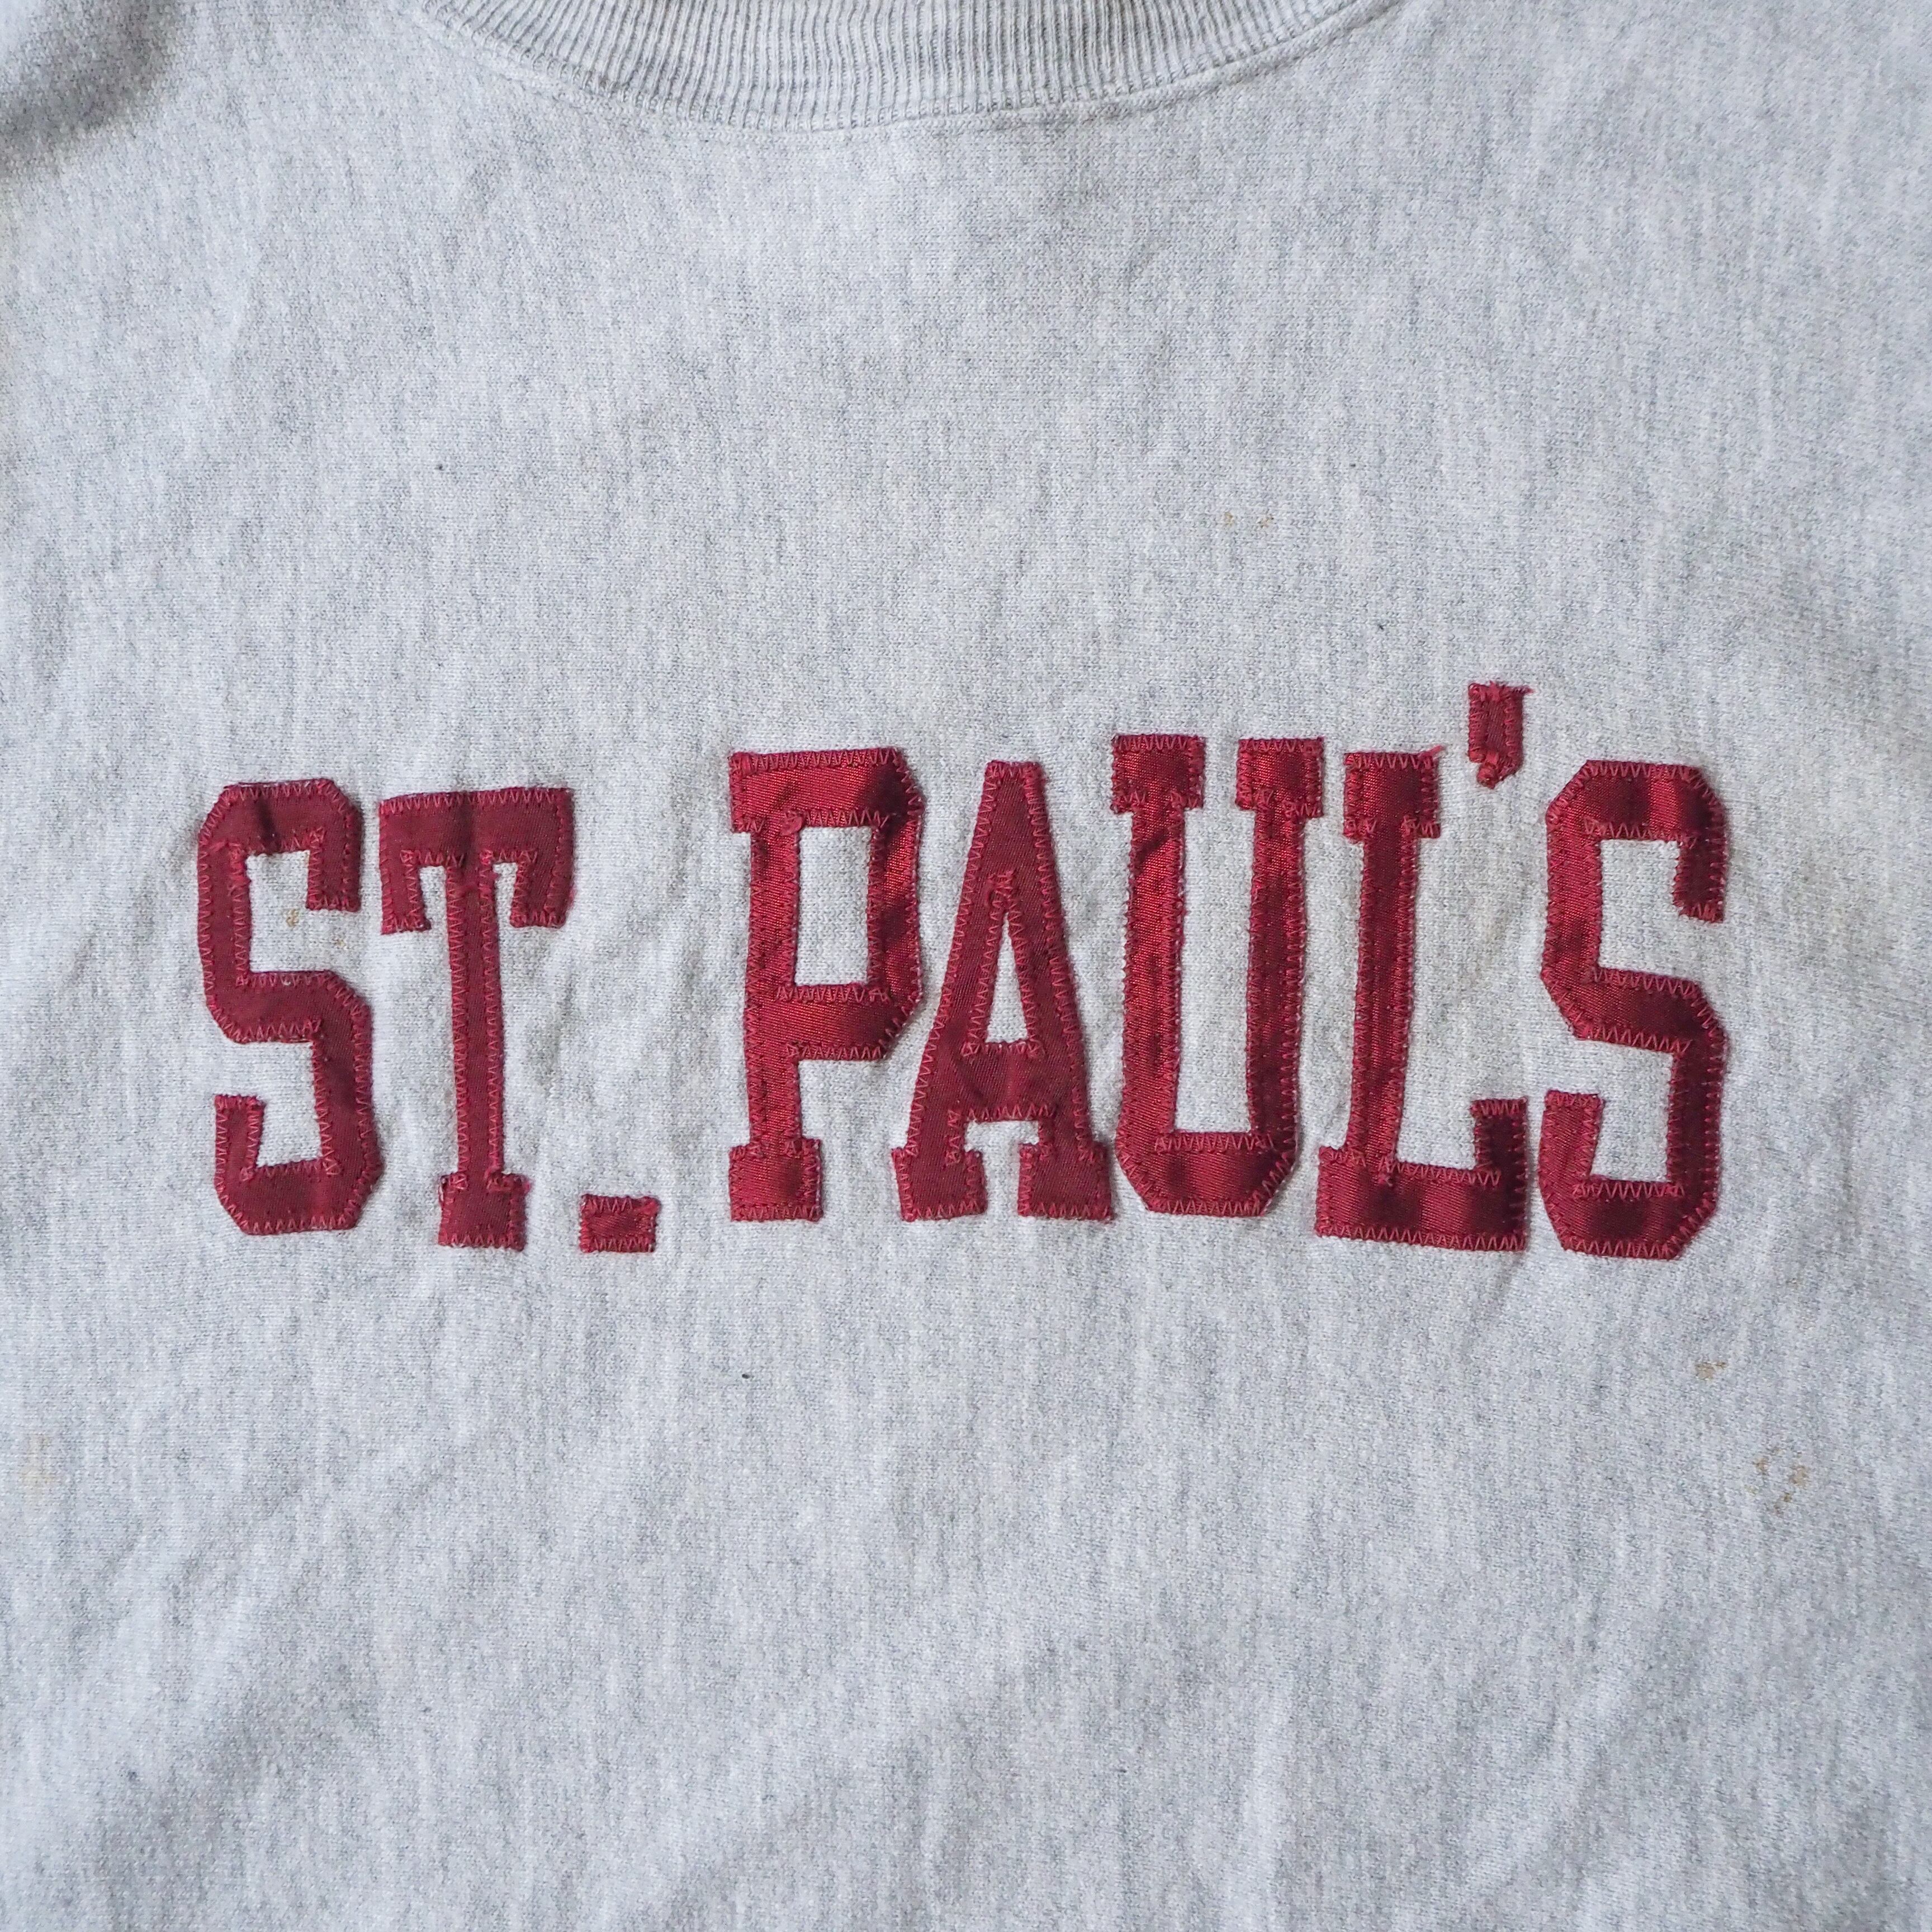 90s “champion” reverse weave 【ST. PAUL'S】 college logo made in